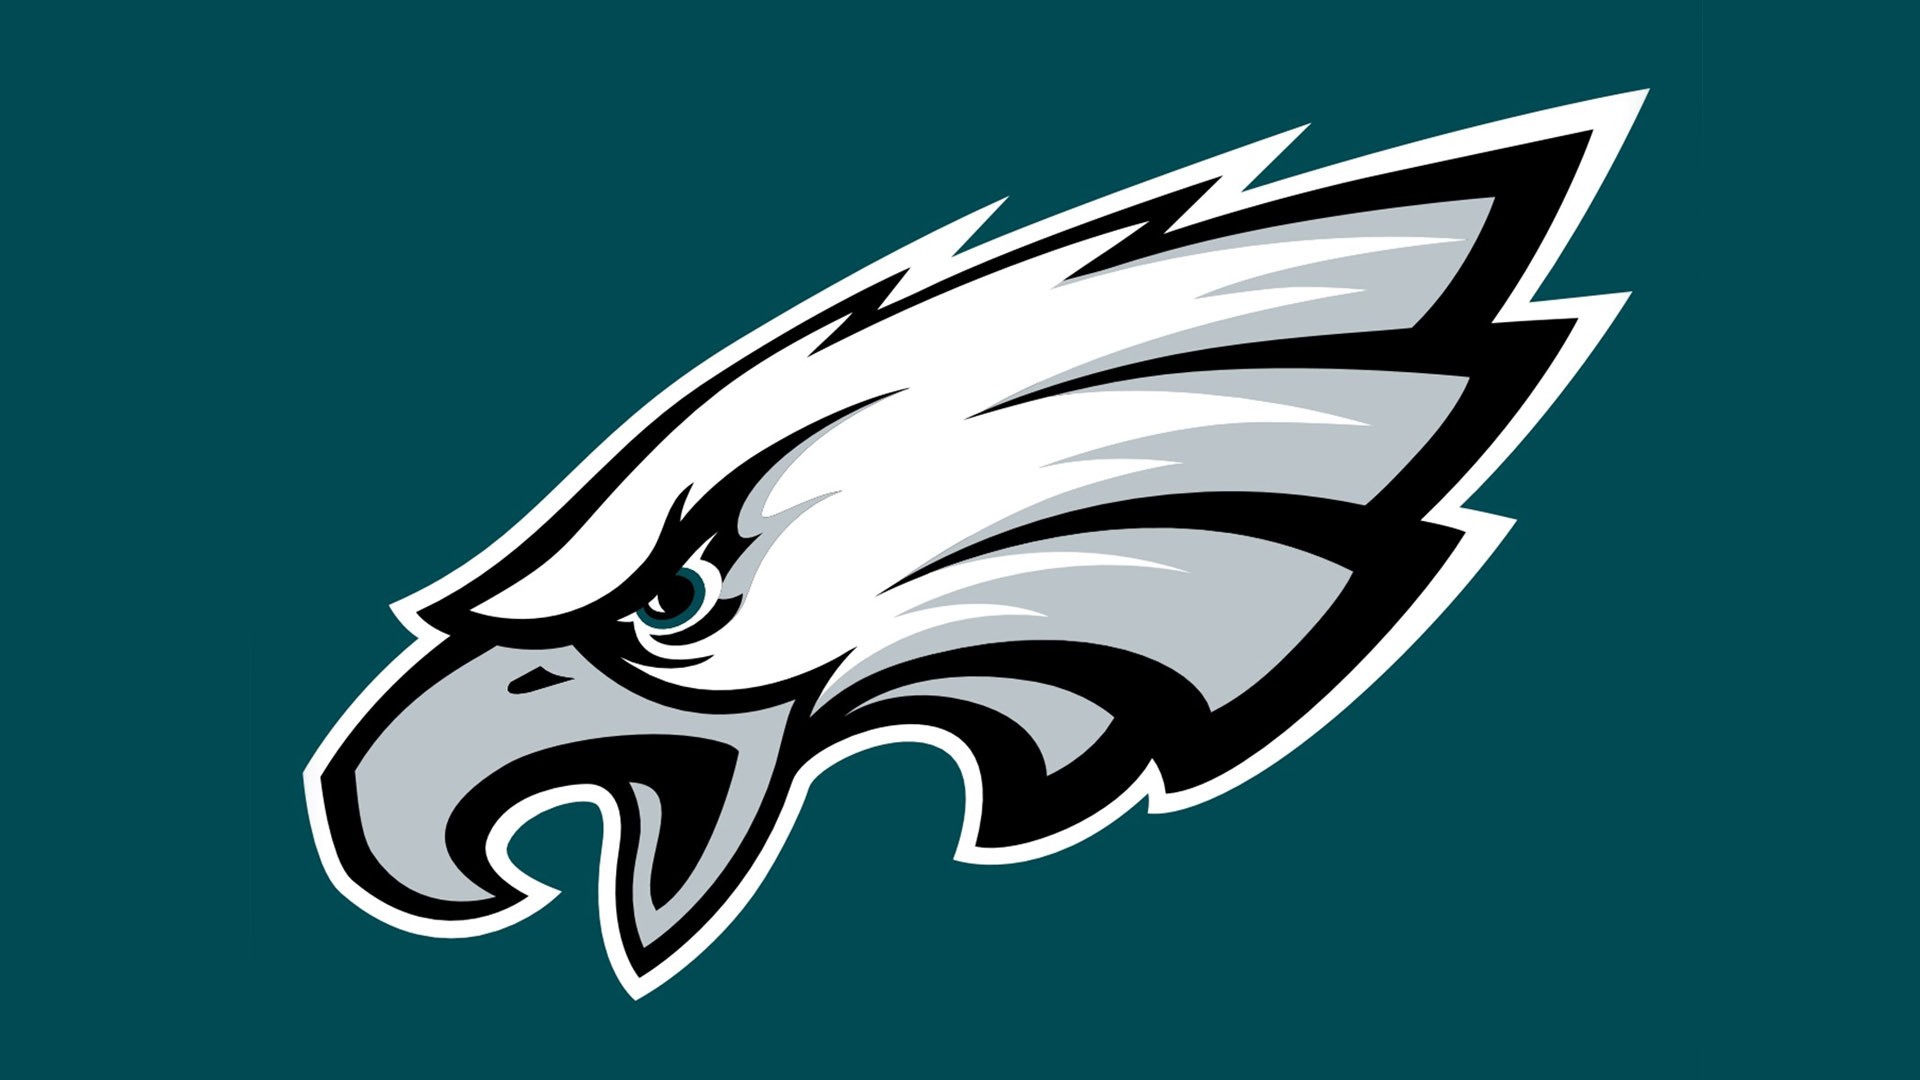 Wallpaper Desktop Phila Eagles HD With Resolution 1920X1080 pixel. You can make this wallpaper for your Mac or Windows Desktop Background, iPhone, Android or Tablet and another Smartphone device for free